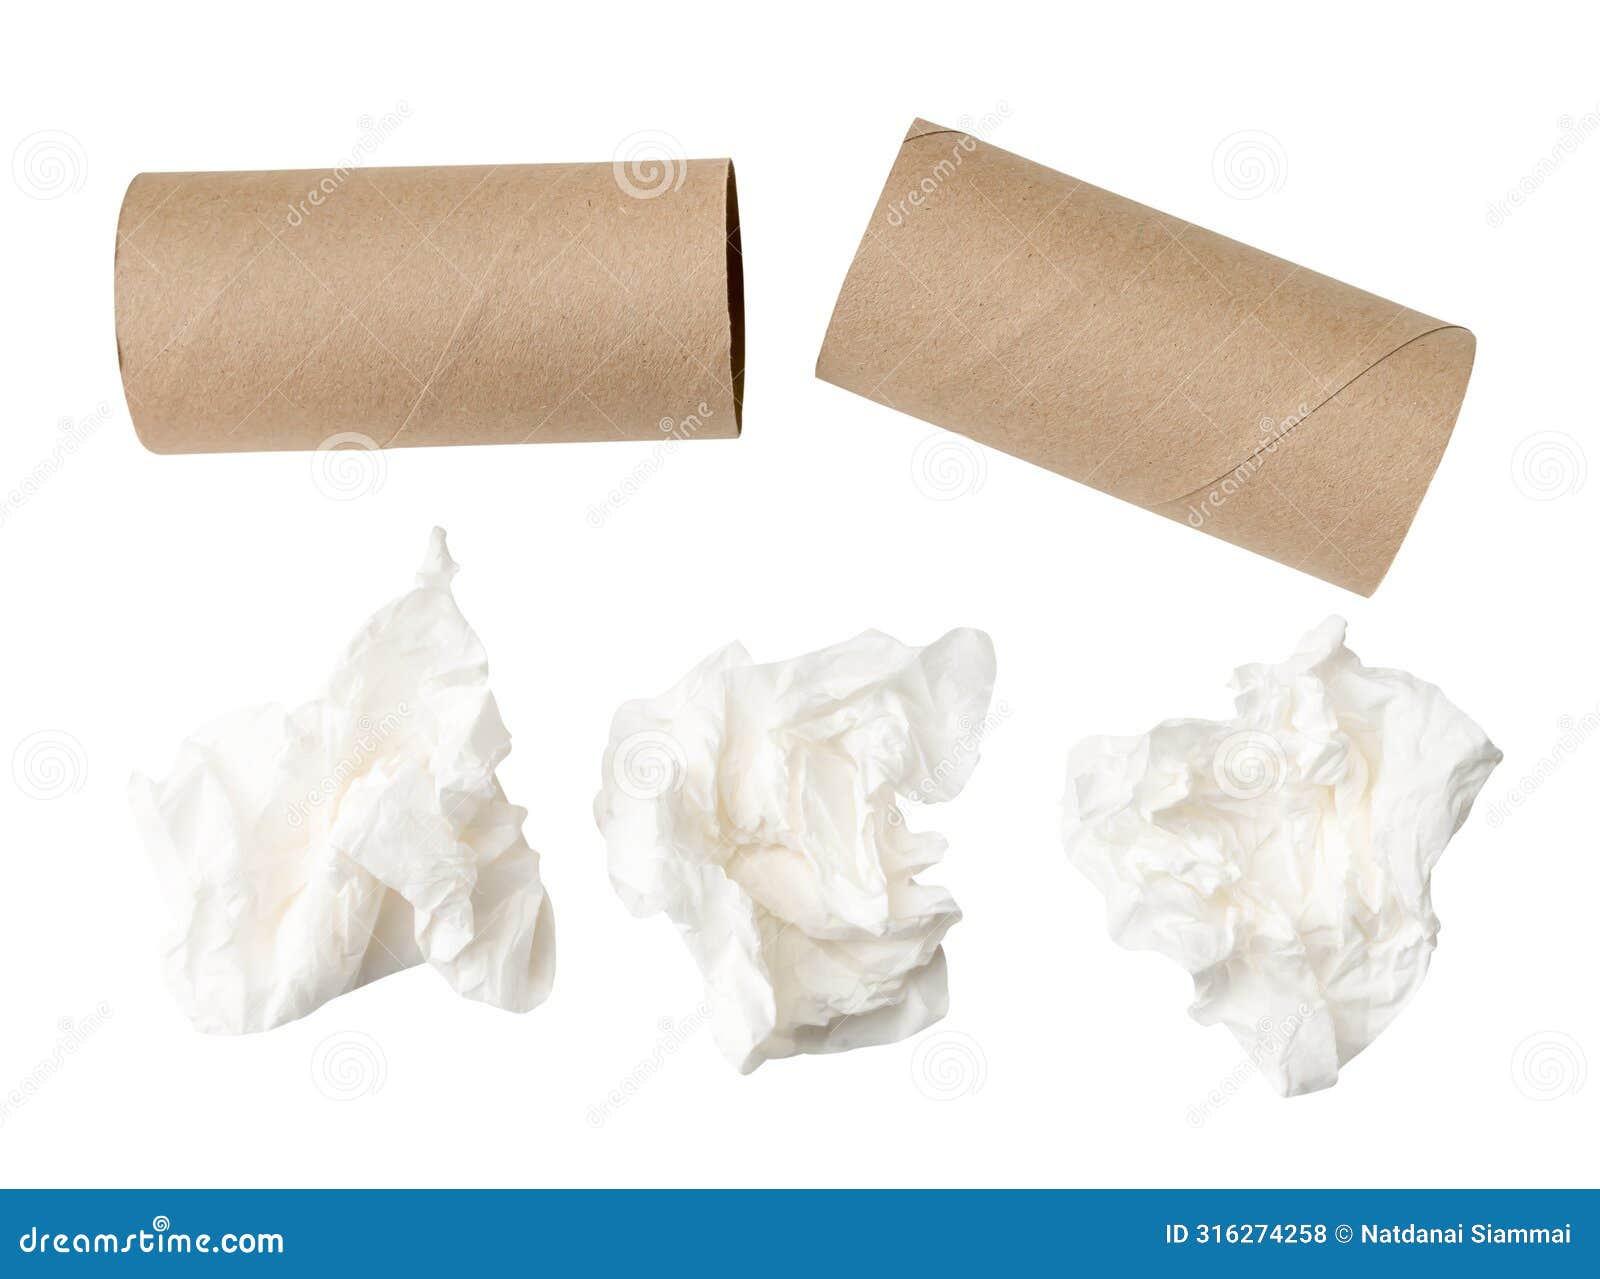 top view set of screwed or crumpled tissue paper balls with cores after use in toilet or restroom  on white background